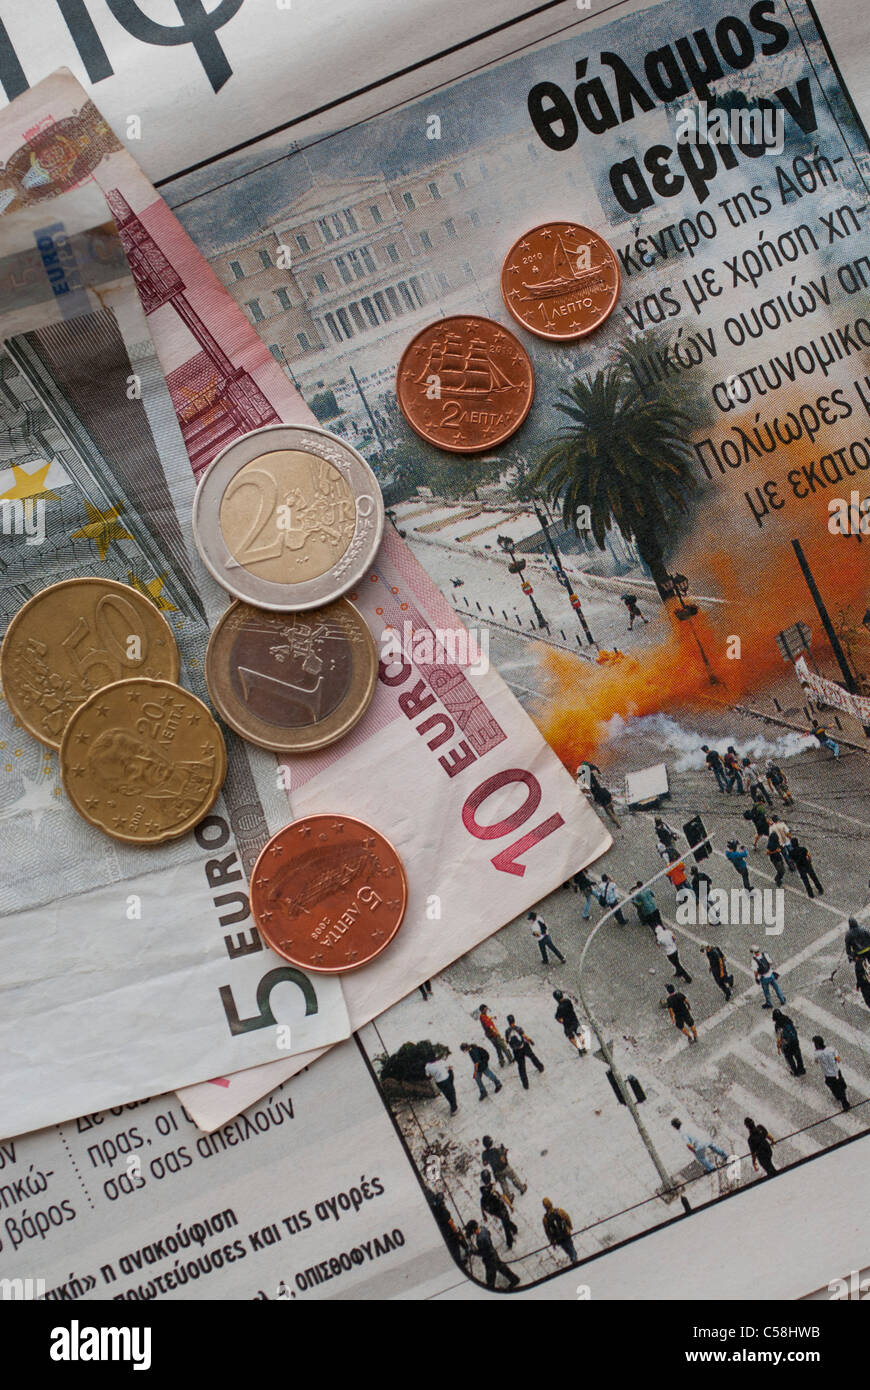 greece,protests,financial,bailout,crisis, Stock Photo